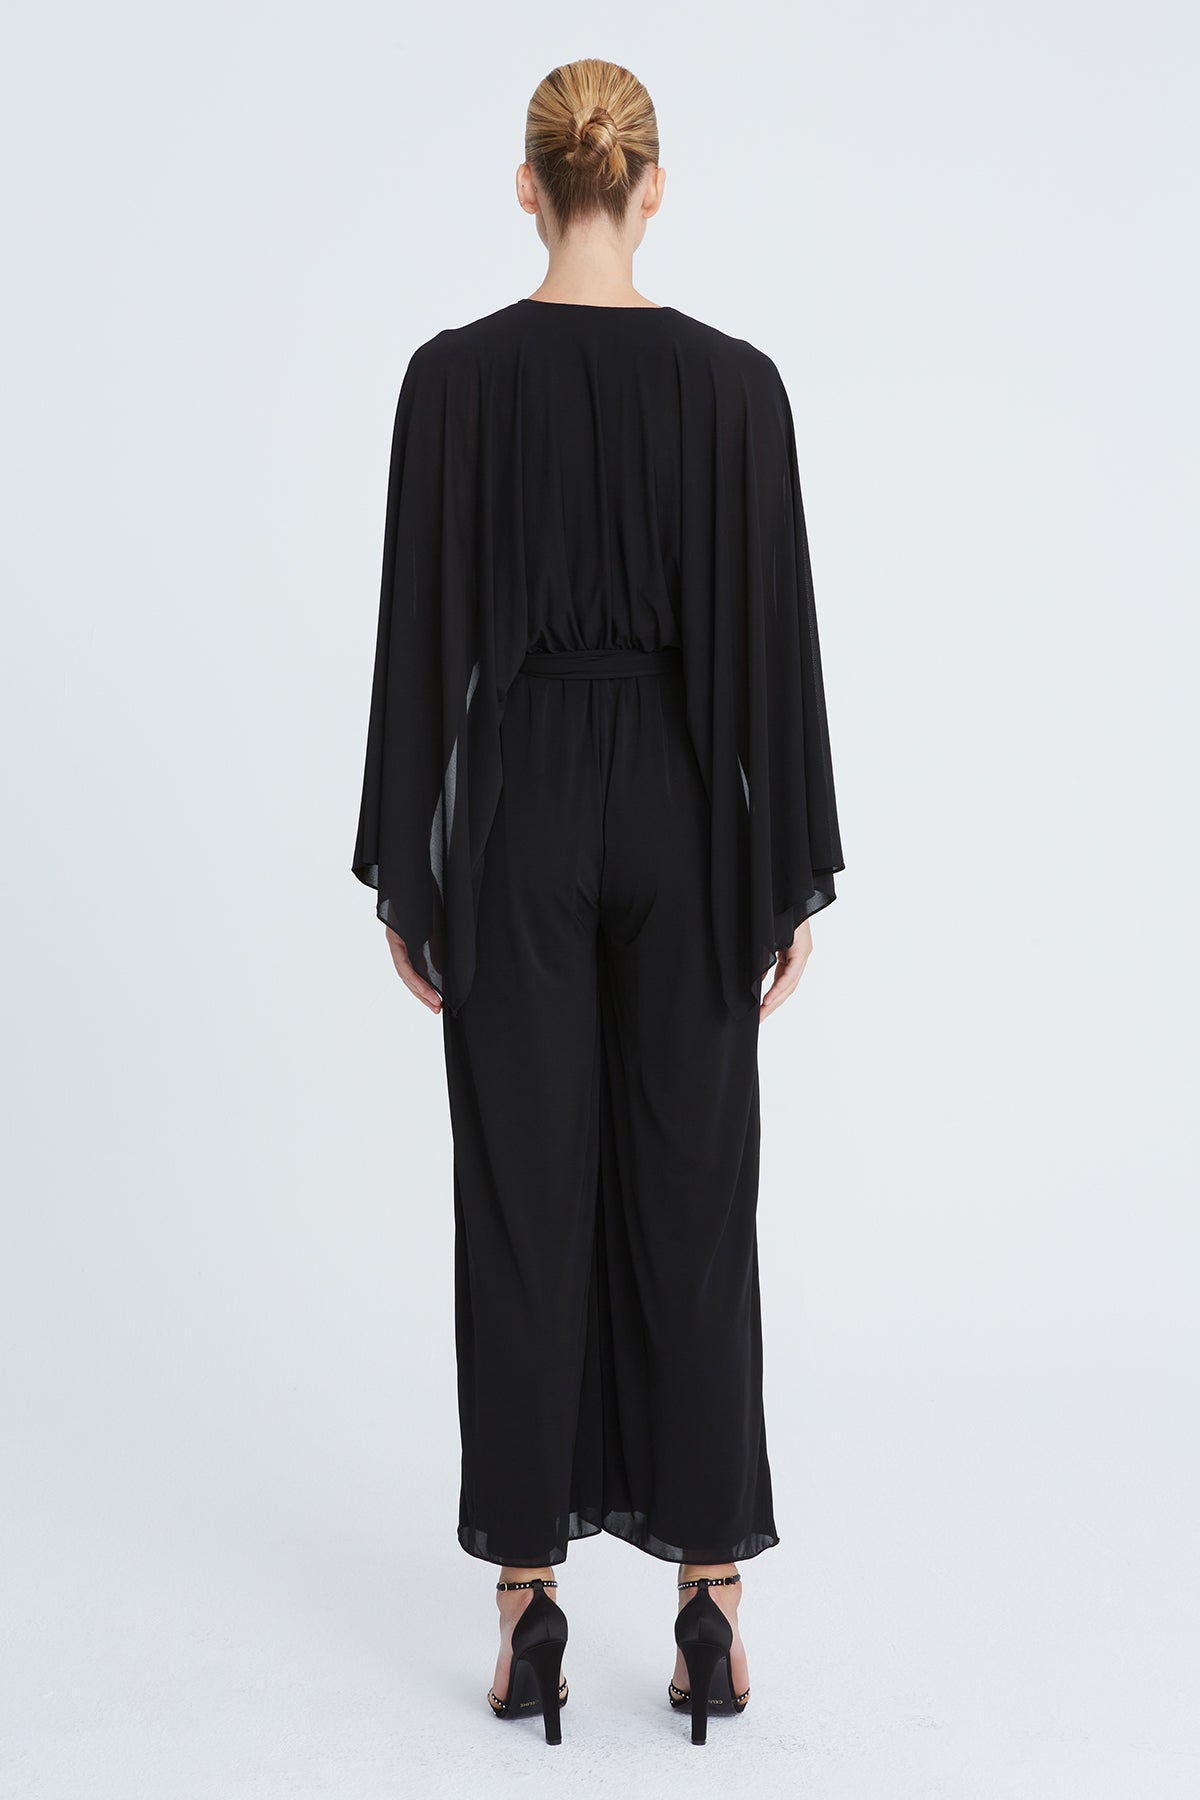 Lainey Jersey Jumpsuit in PURE BLACK